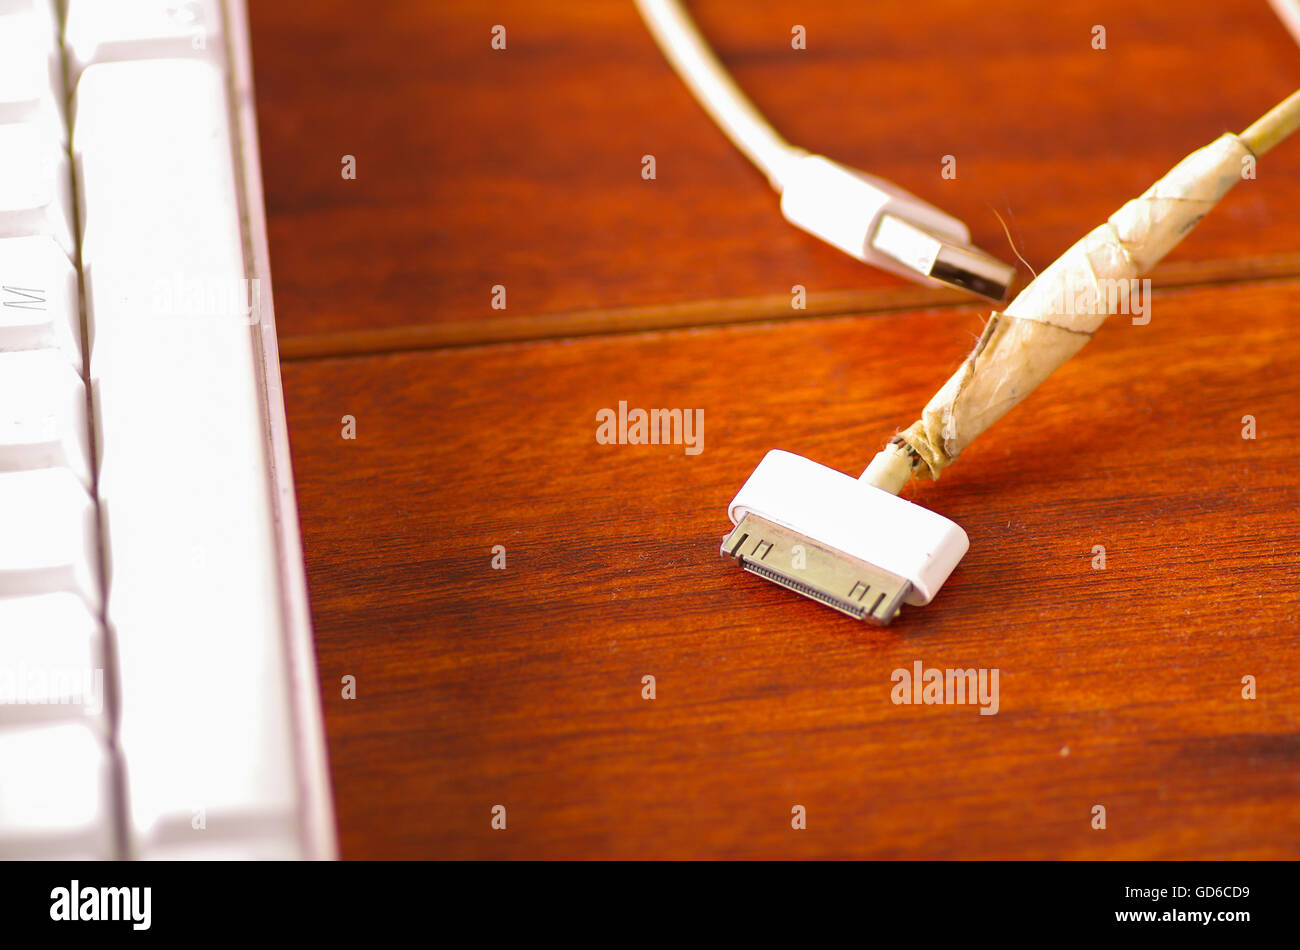 Broken usb mobile charger cable lying on wooden surface, masking tape used  to fix wire Stock Photo - Alamy